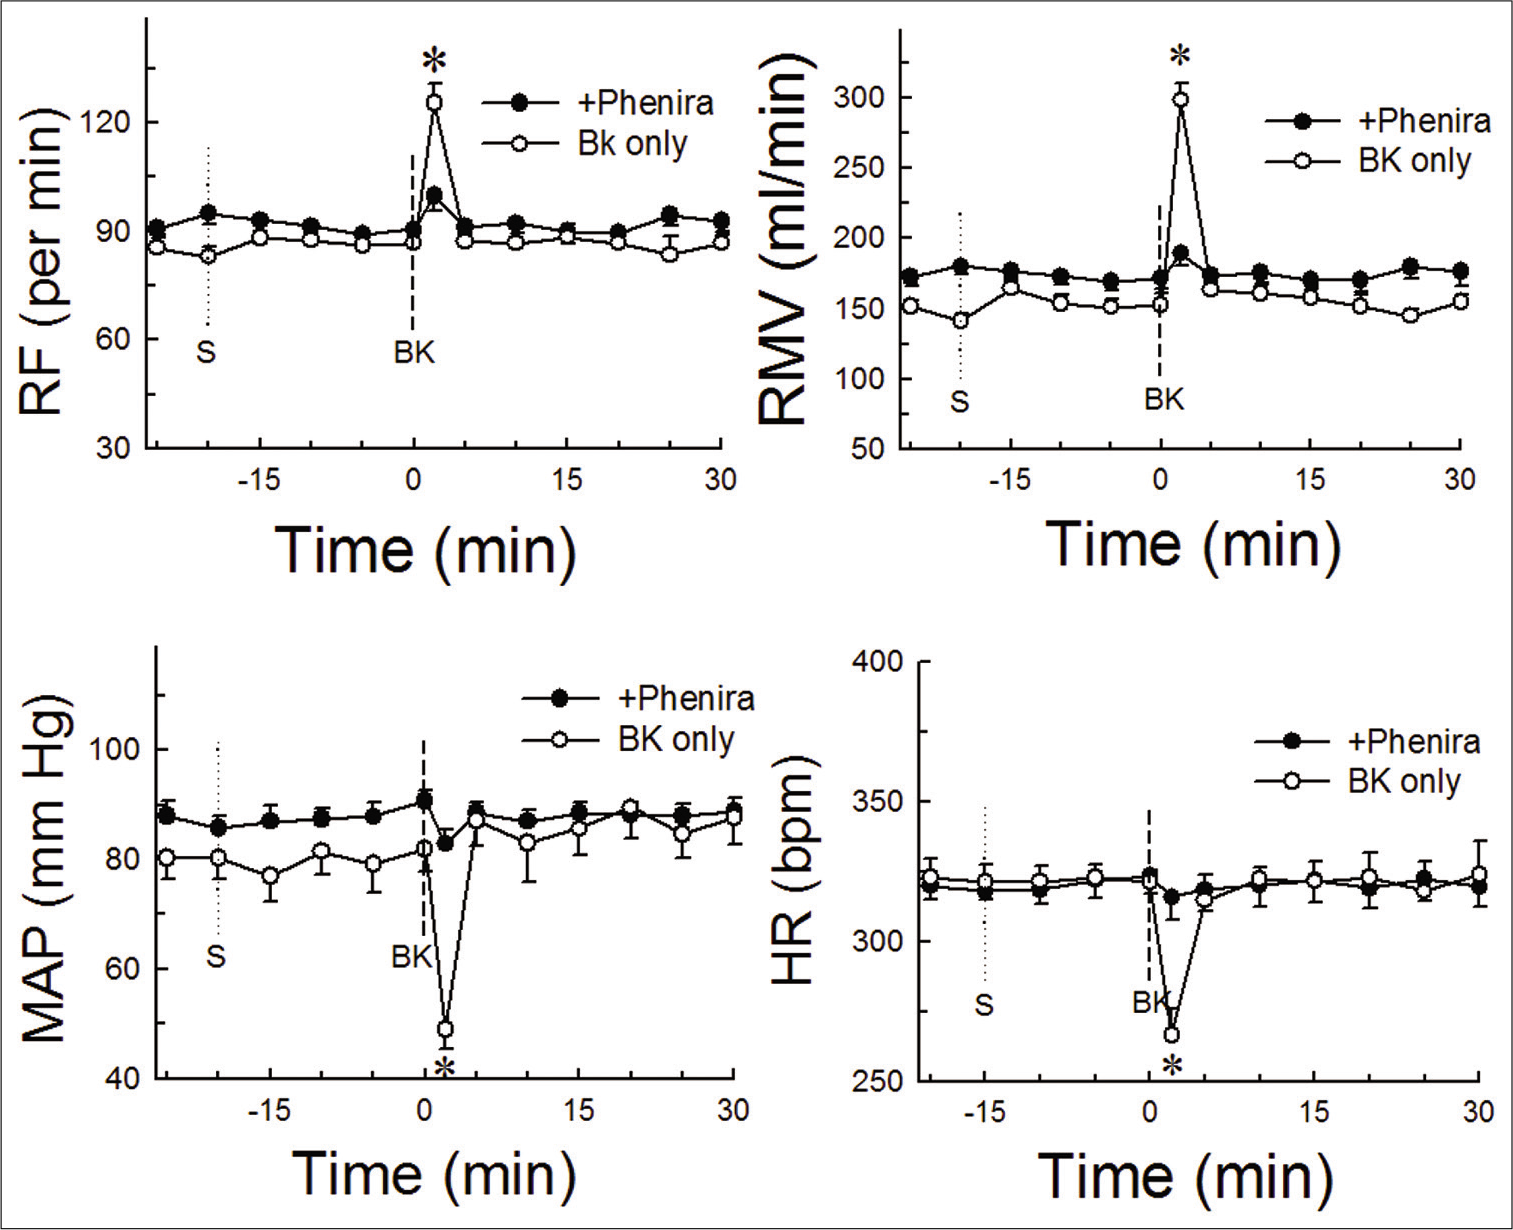 Pheniramine maleate (+Phenira) pre-treatment blocked the bradykinin (BK)-induced responses. The time-matched responses relationship in pheniramine maleate pretreated animals and BK only group on respiratory frequency (RF), respiratory minute ventilation (RMV), mean arterial pressure (MAP), and heart rate (HR) is shown. The RF, RMV, MAP, and HR responses are significantly different from BK only group (P < 0.05, post hoc Dunnett’s t-test [two sided]). Dotted line indicates the point of injection of saline (s)/BK. An asterisk (*) indicates P < 0.05 as compared to “BK only” group from pheniramine maleate pre-treated group.